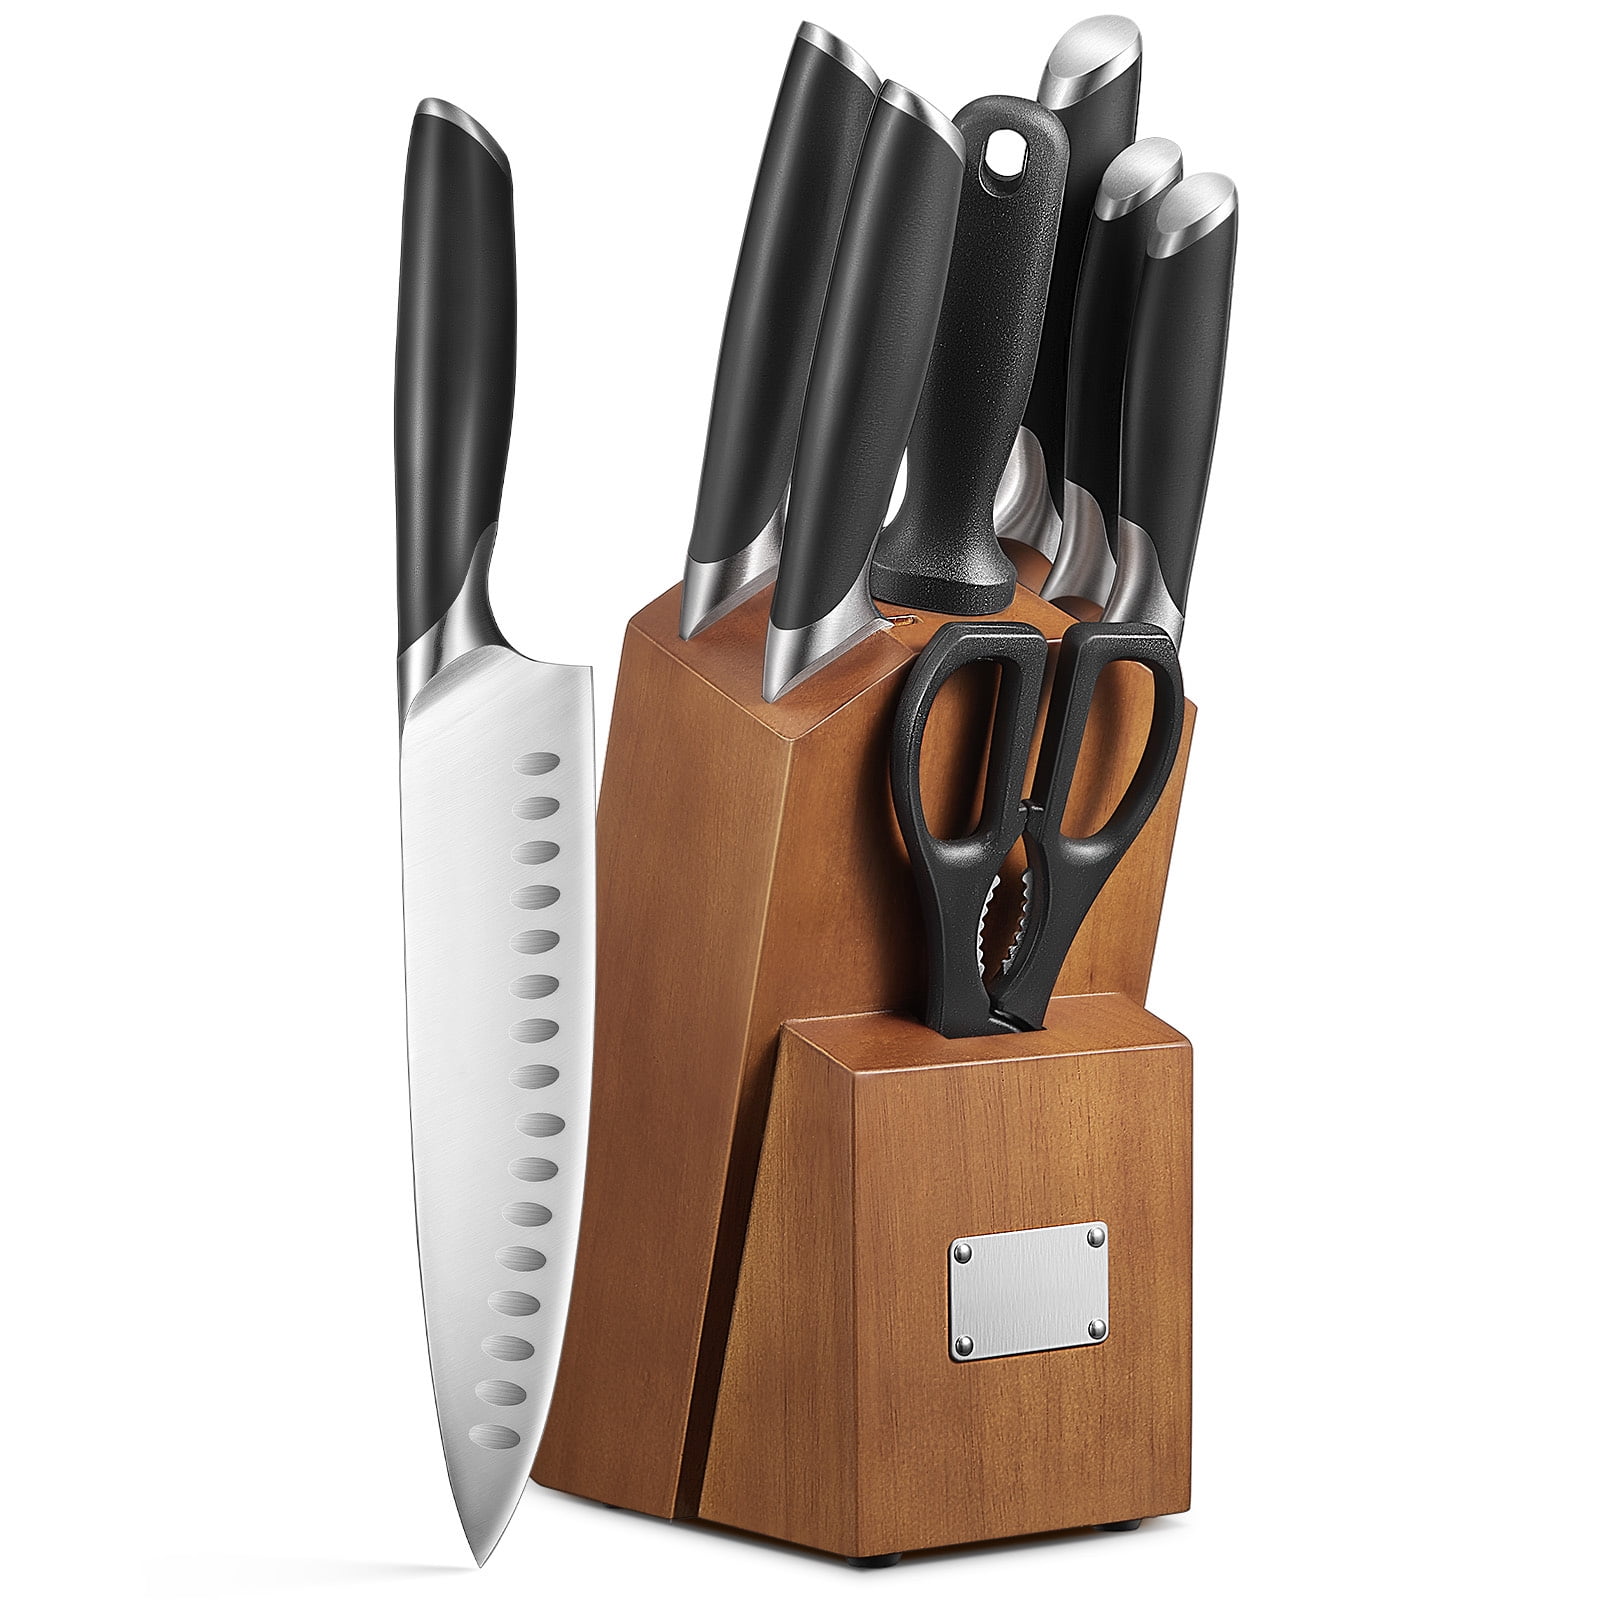 DEIK Knife Block, Professional Knife Set, 16 Pieces, Stainless Steel Chef's  Knife Set with Wooden Block